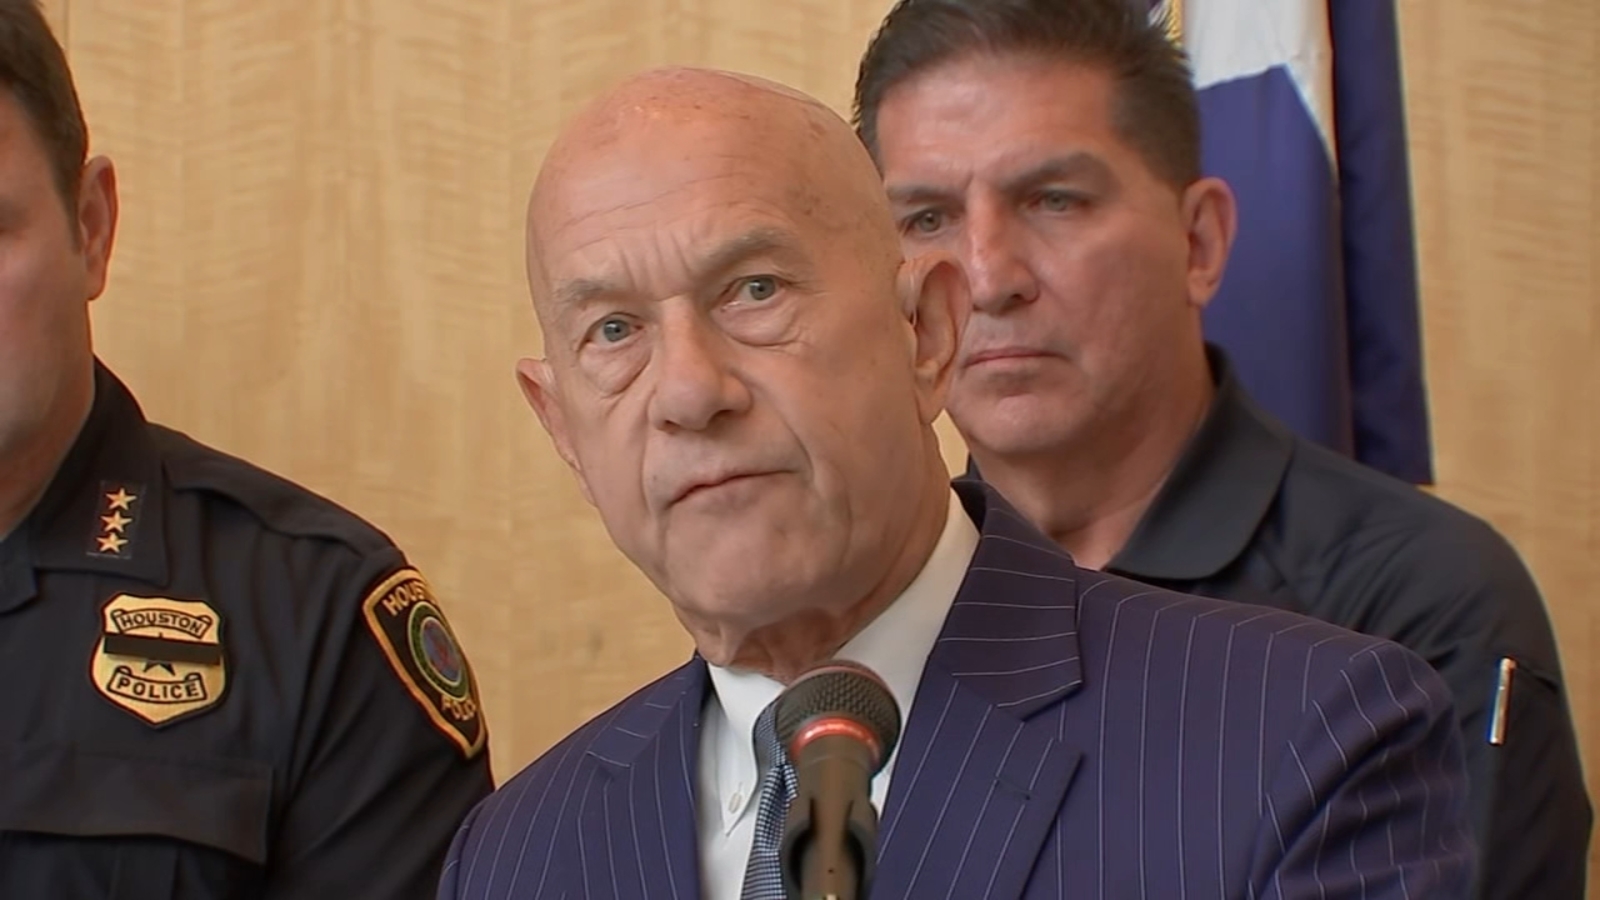 Mayor Whitmire and acting police chief rebuke councilman’s critique on Beryl response in Houston [Video]